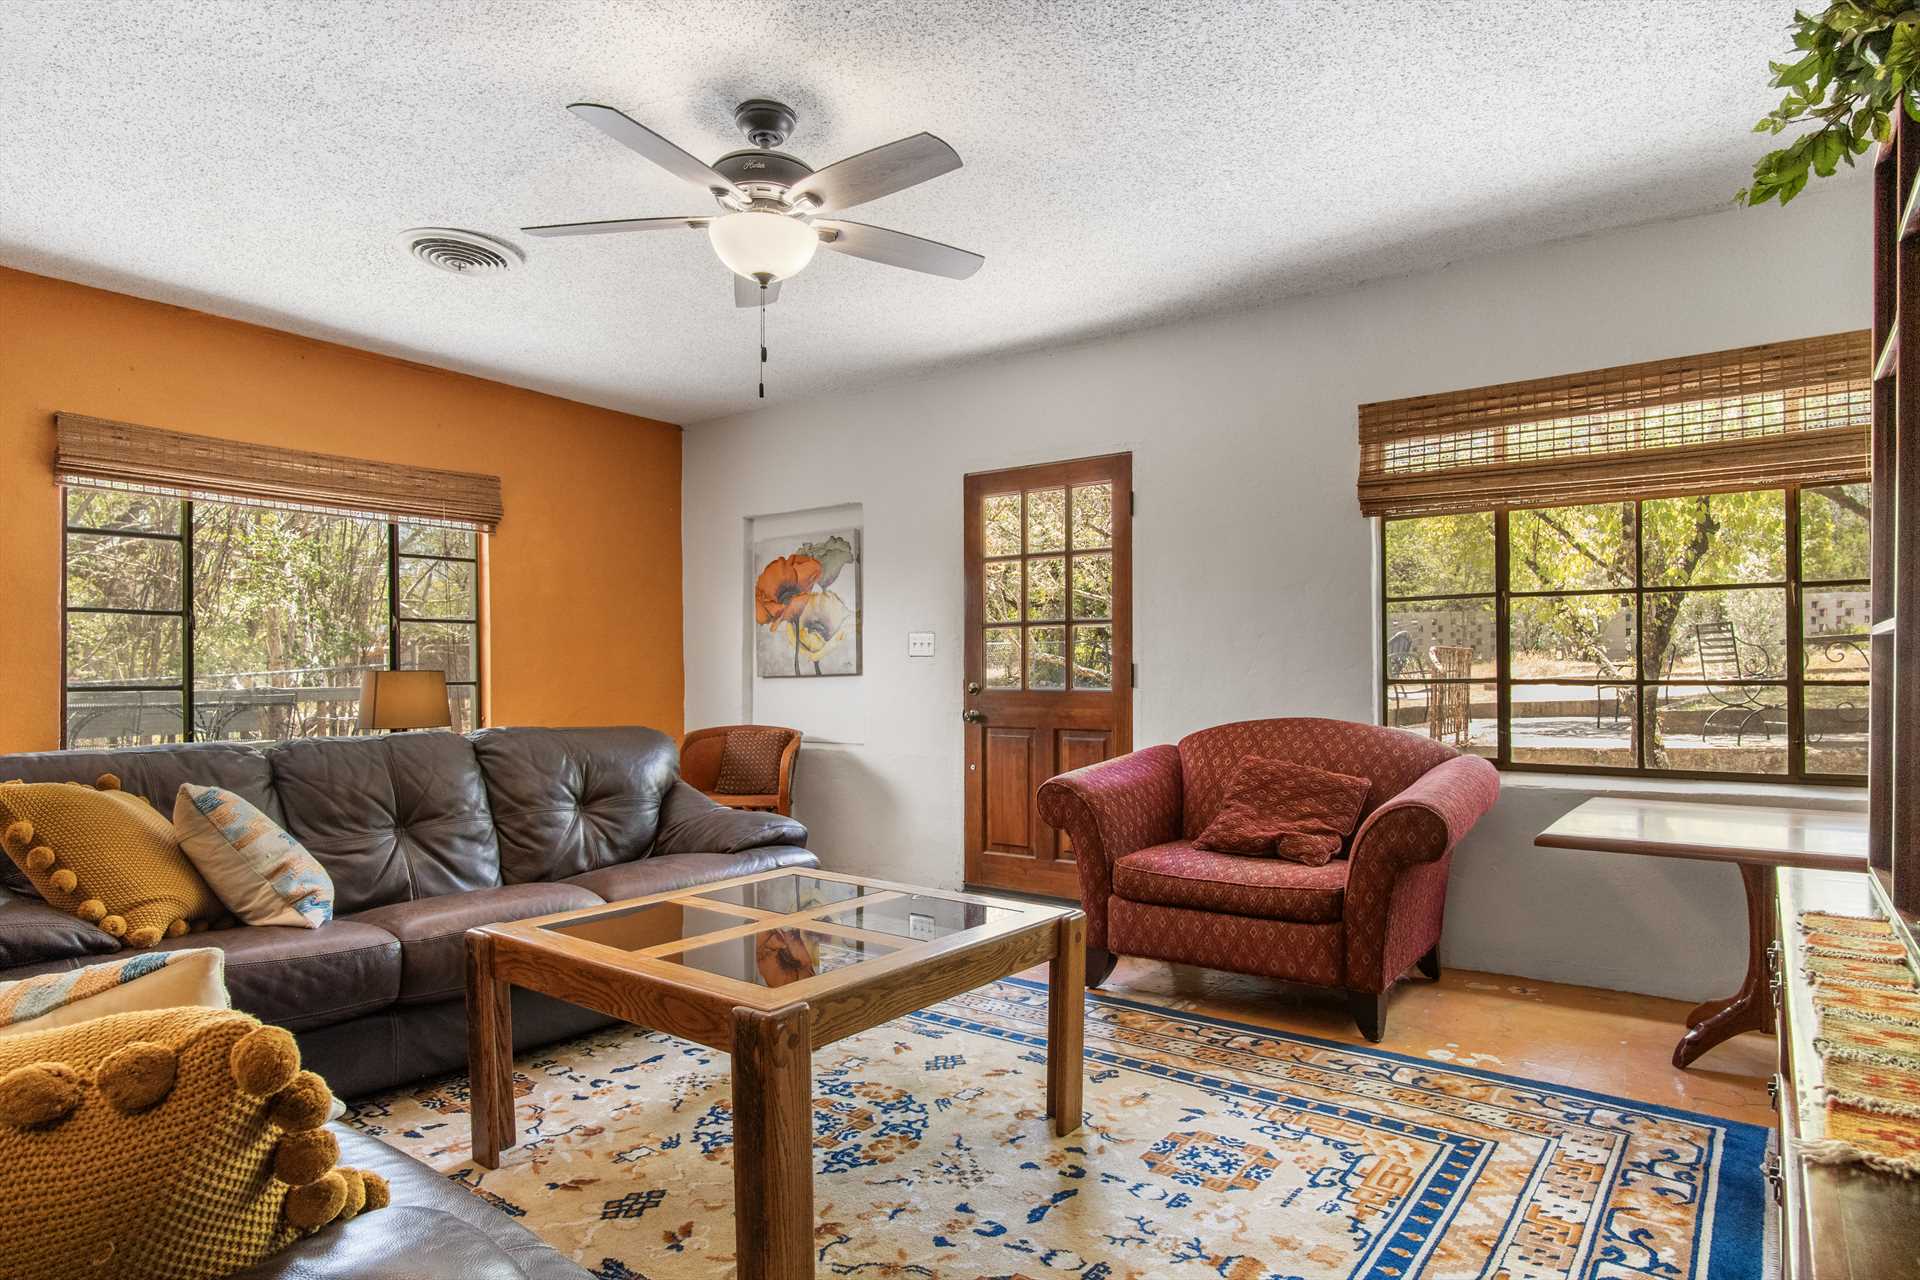                                                 Leg-stretching space and warm and colorful decor make Casa del Rio a friendly home away from home!